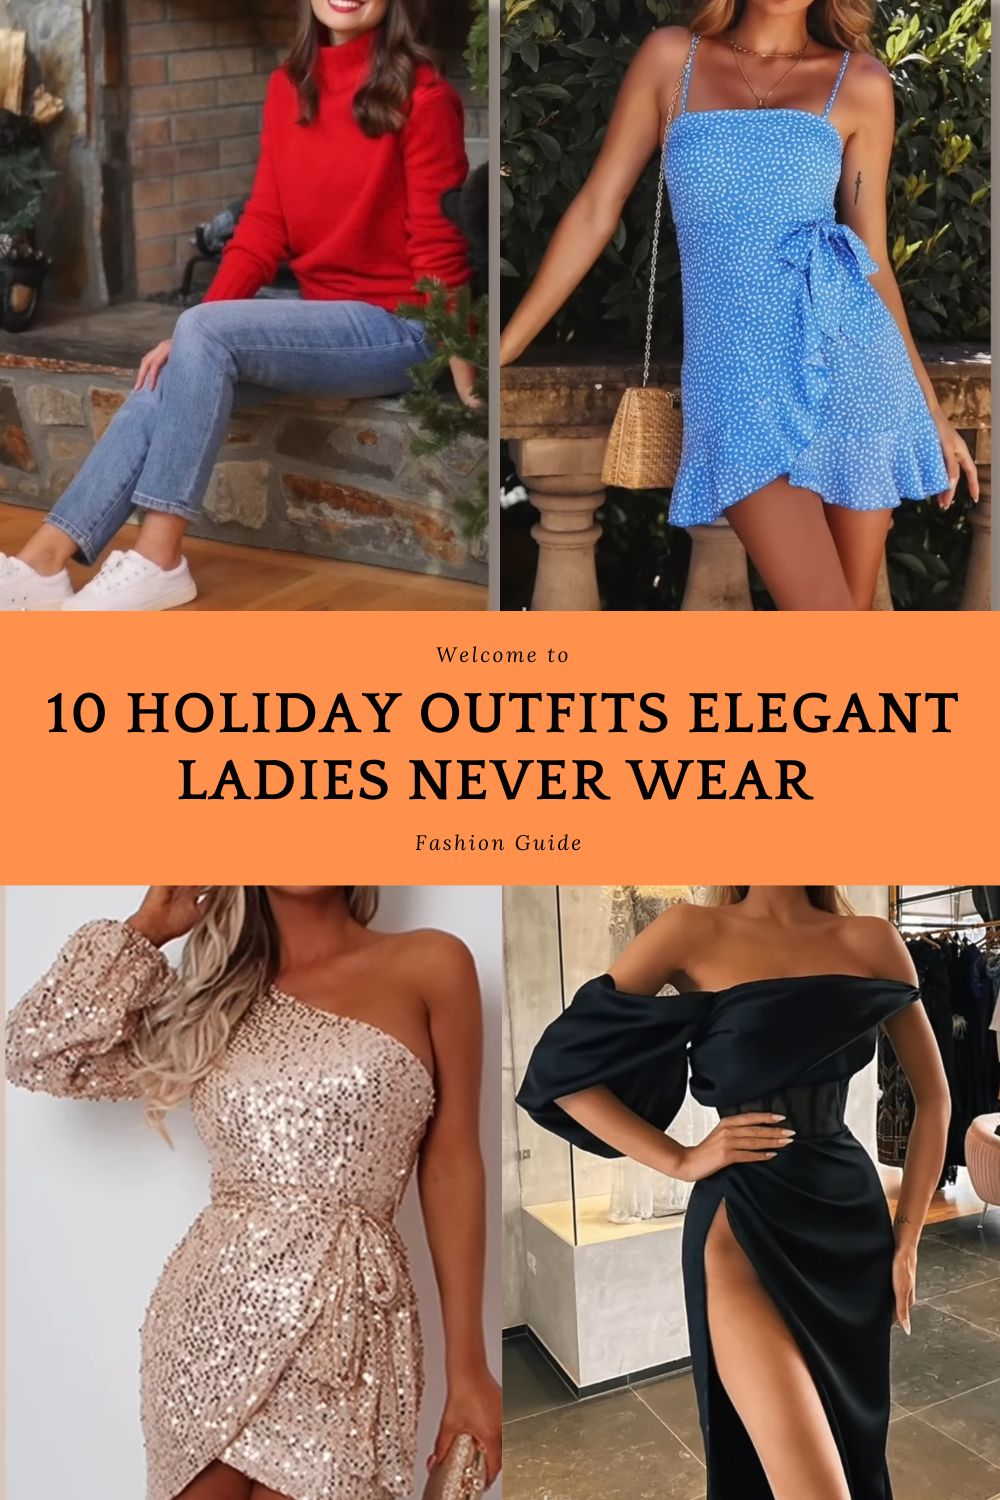 10 Holiday Outfits Elegant Ladies Never Wear